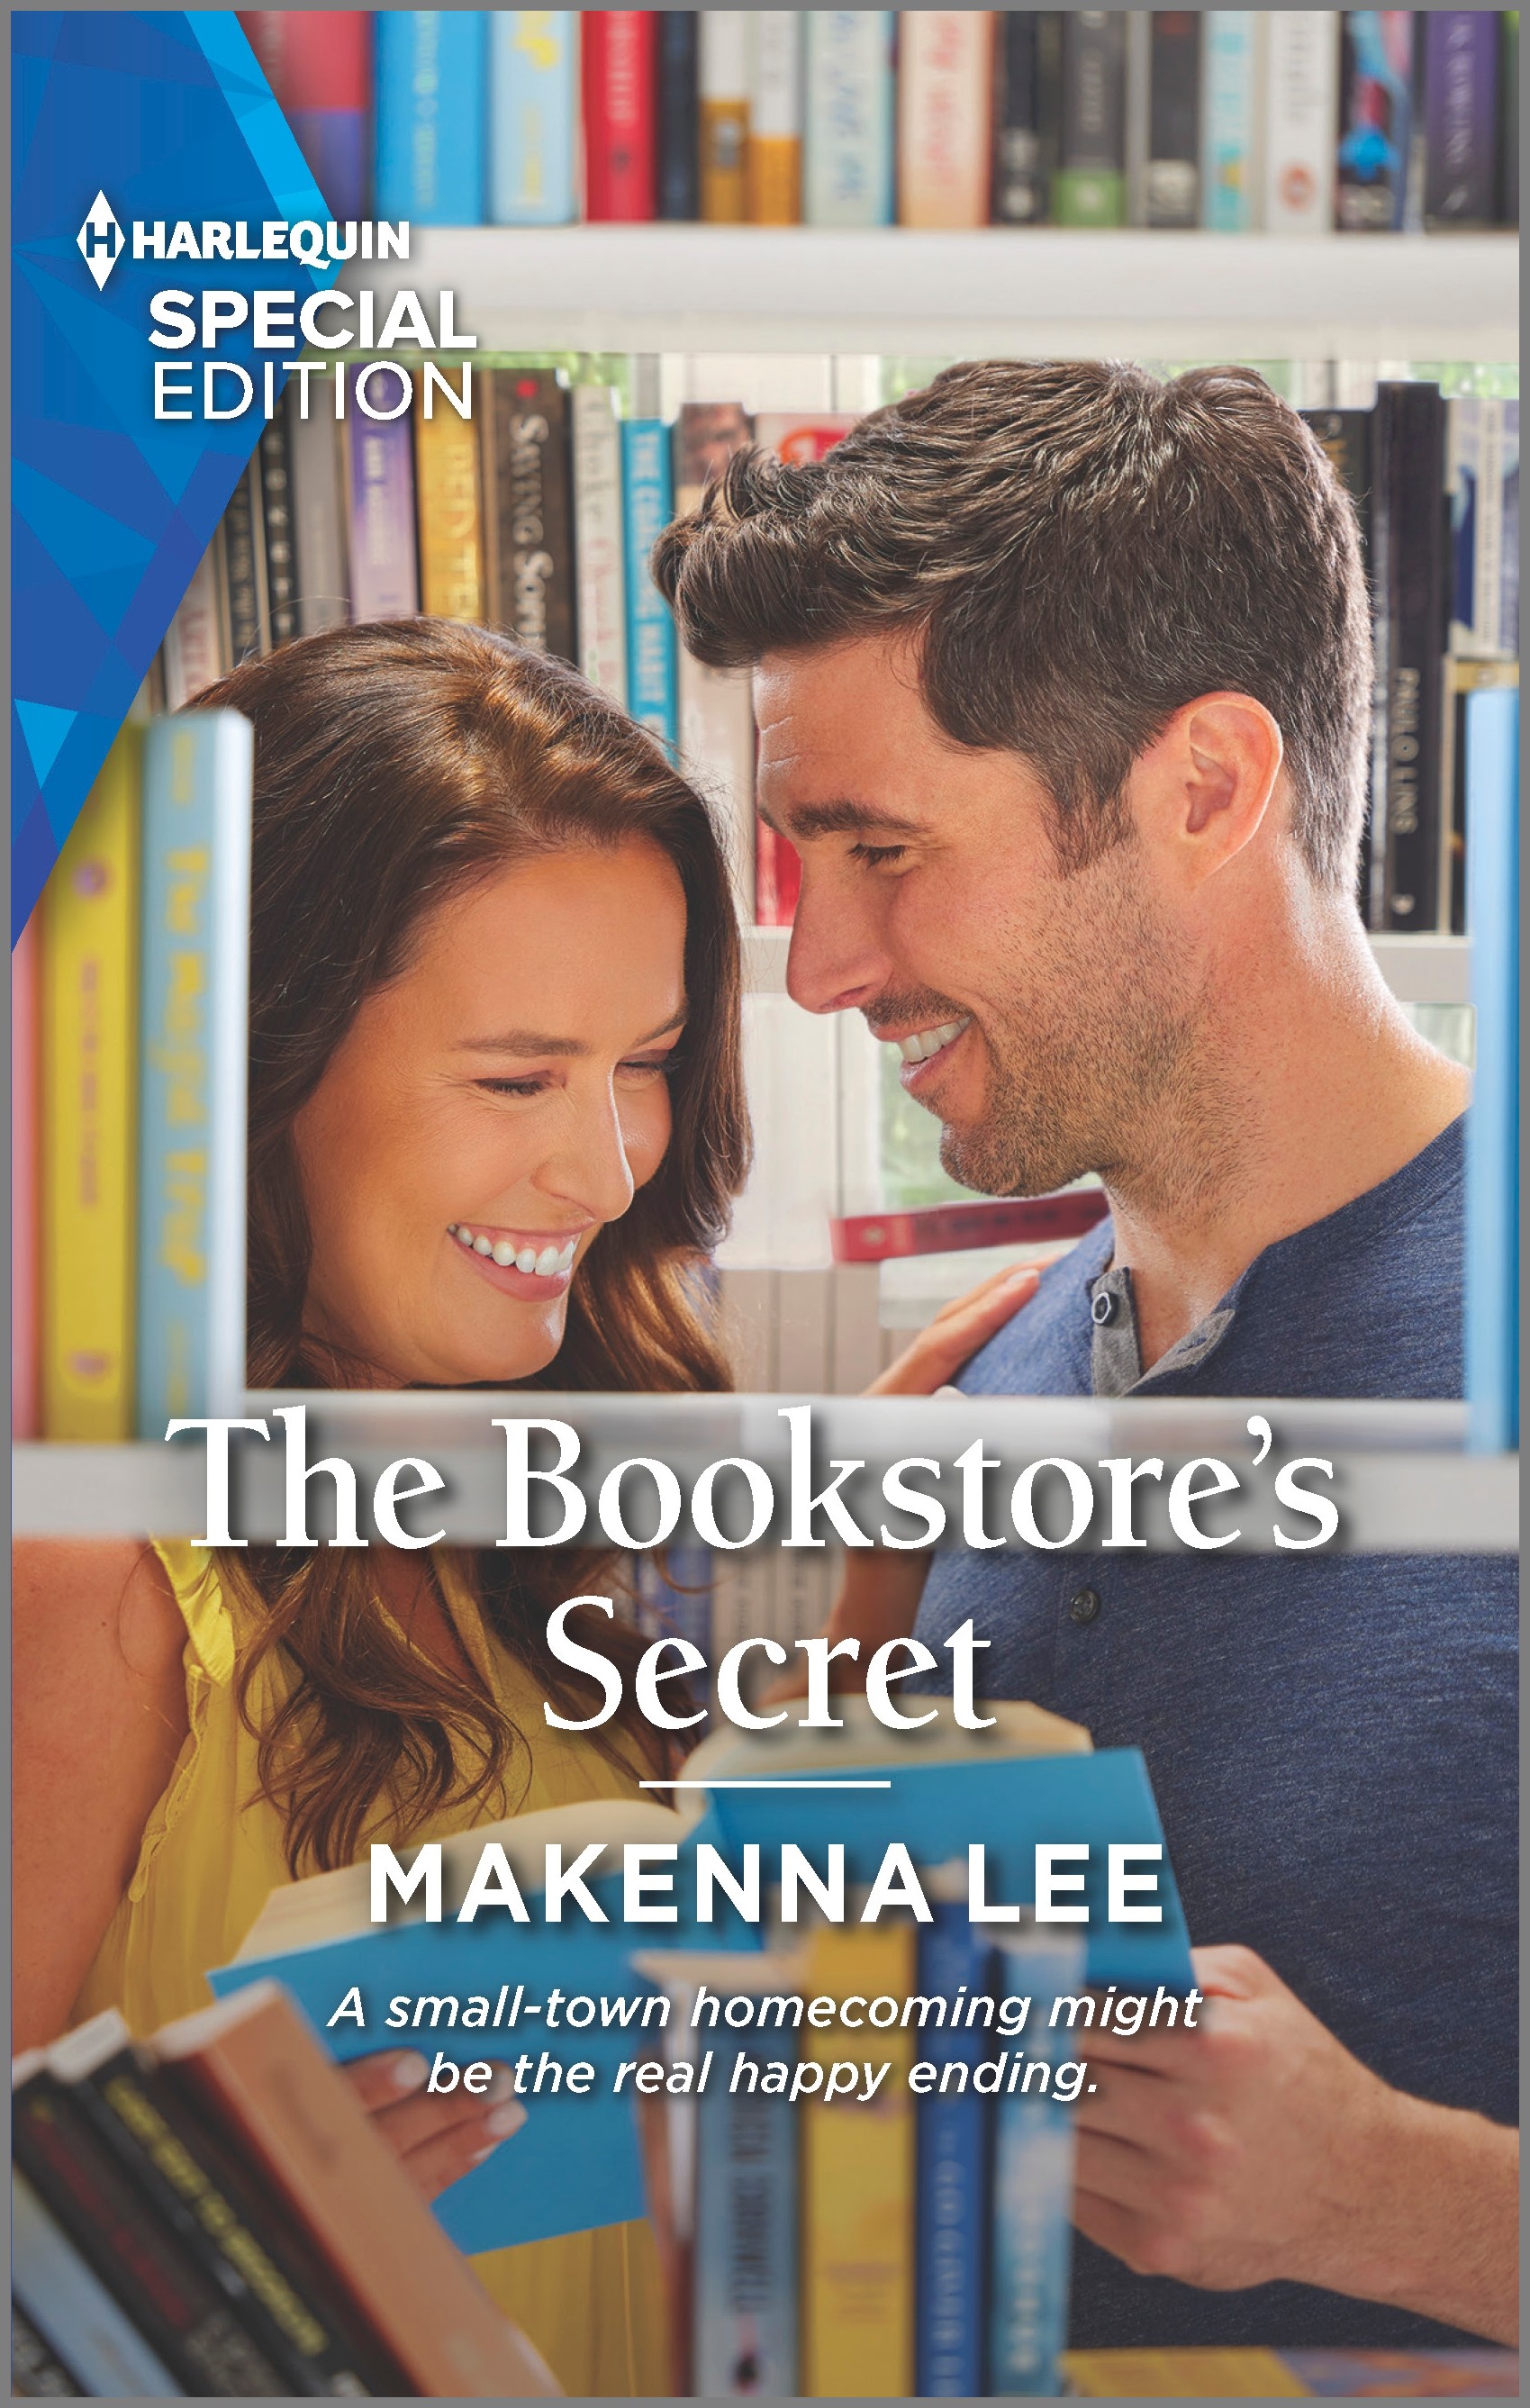 THE BOOKSTORE'S SECRET by Makenna Lee